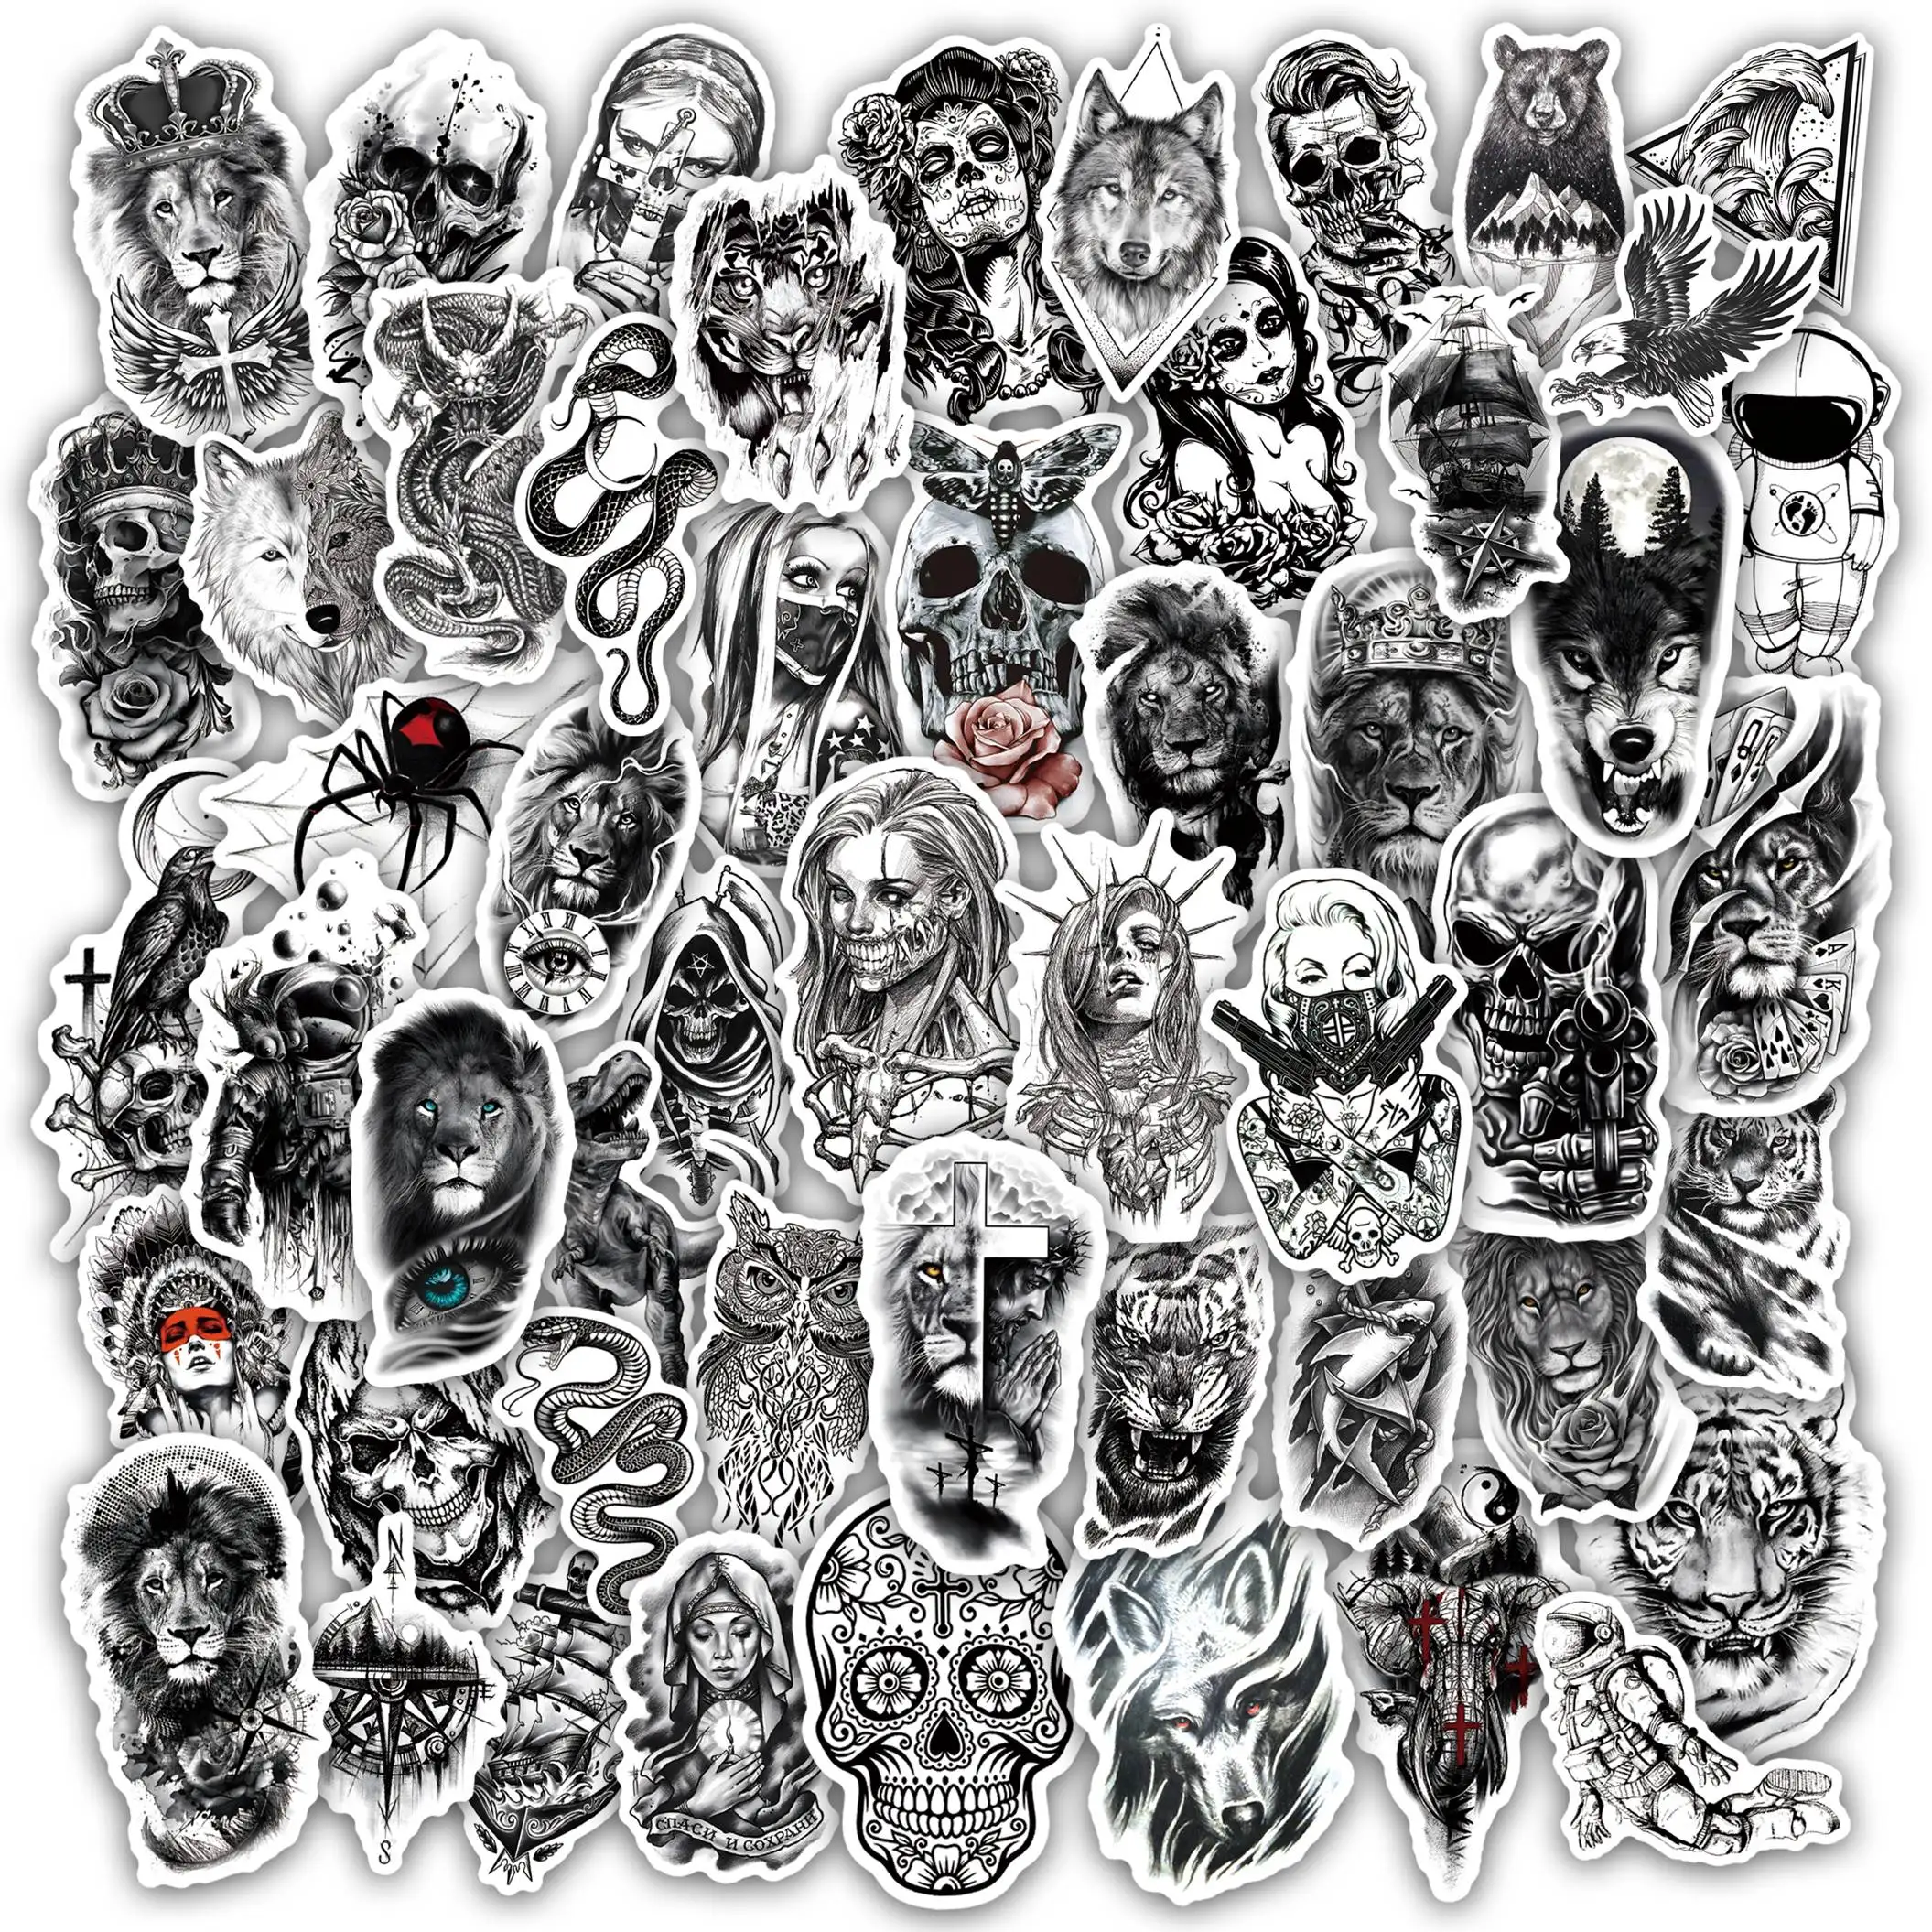 52 Sheets Skull Gangster Bottle Stickers For Adults Teens Black Lion Tiger Vinyl Laptop Decals Bicycle Car Phone 3D Stickers